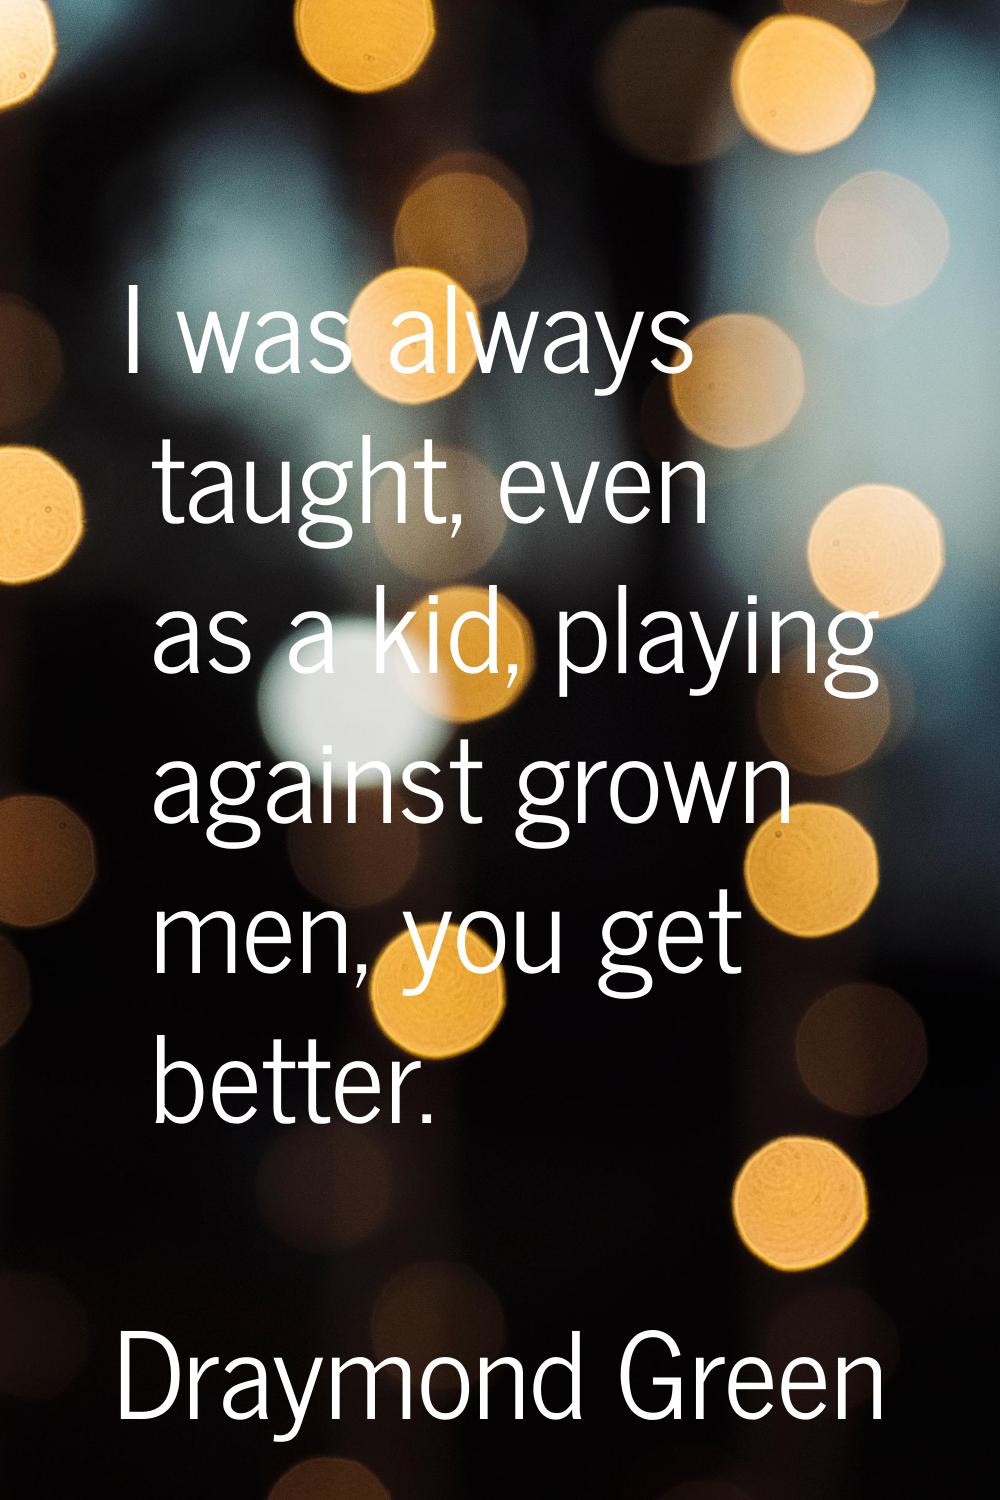 I was always taught, even as a kid, playing against grown men, you get better.